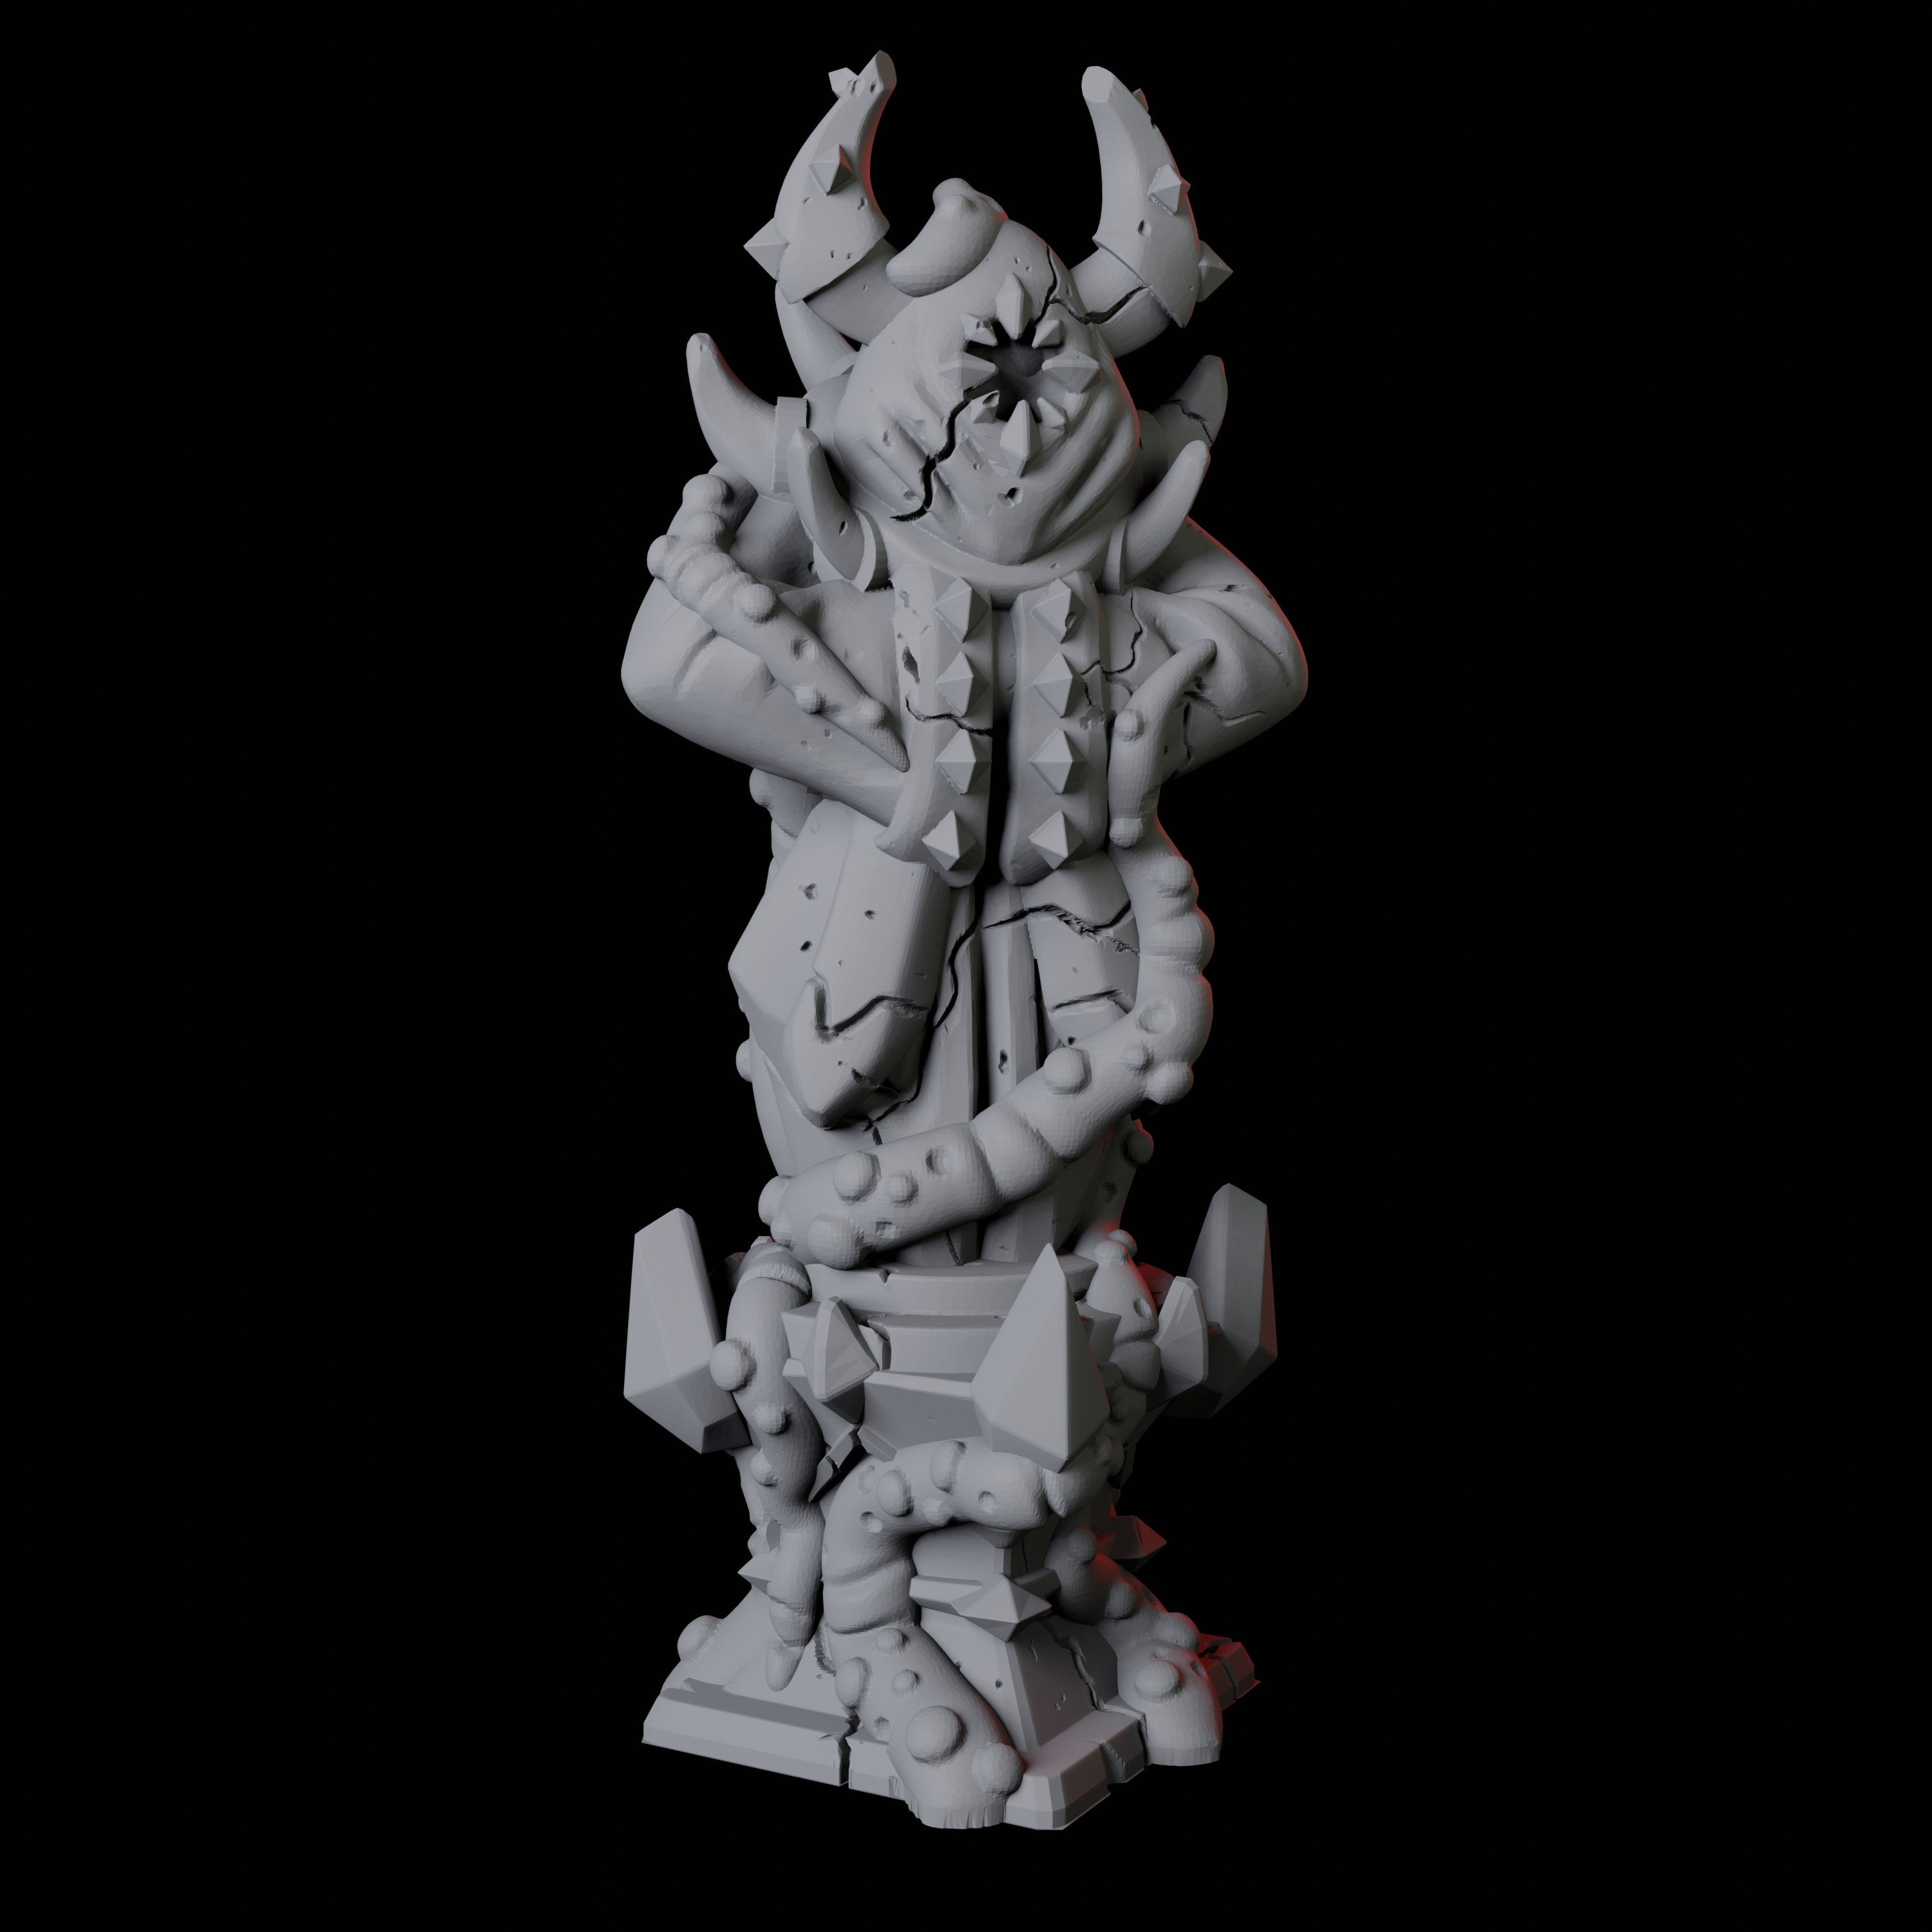 Cthulhu Statue Miniature for Dungeons and Dragons